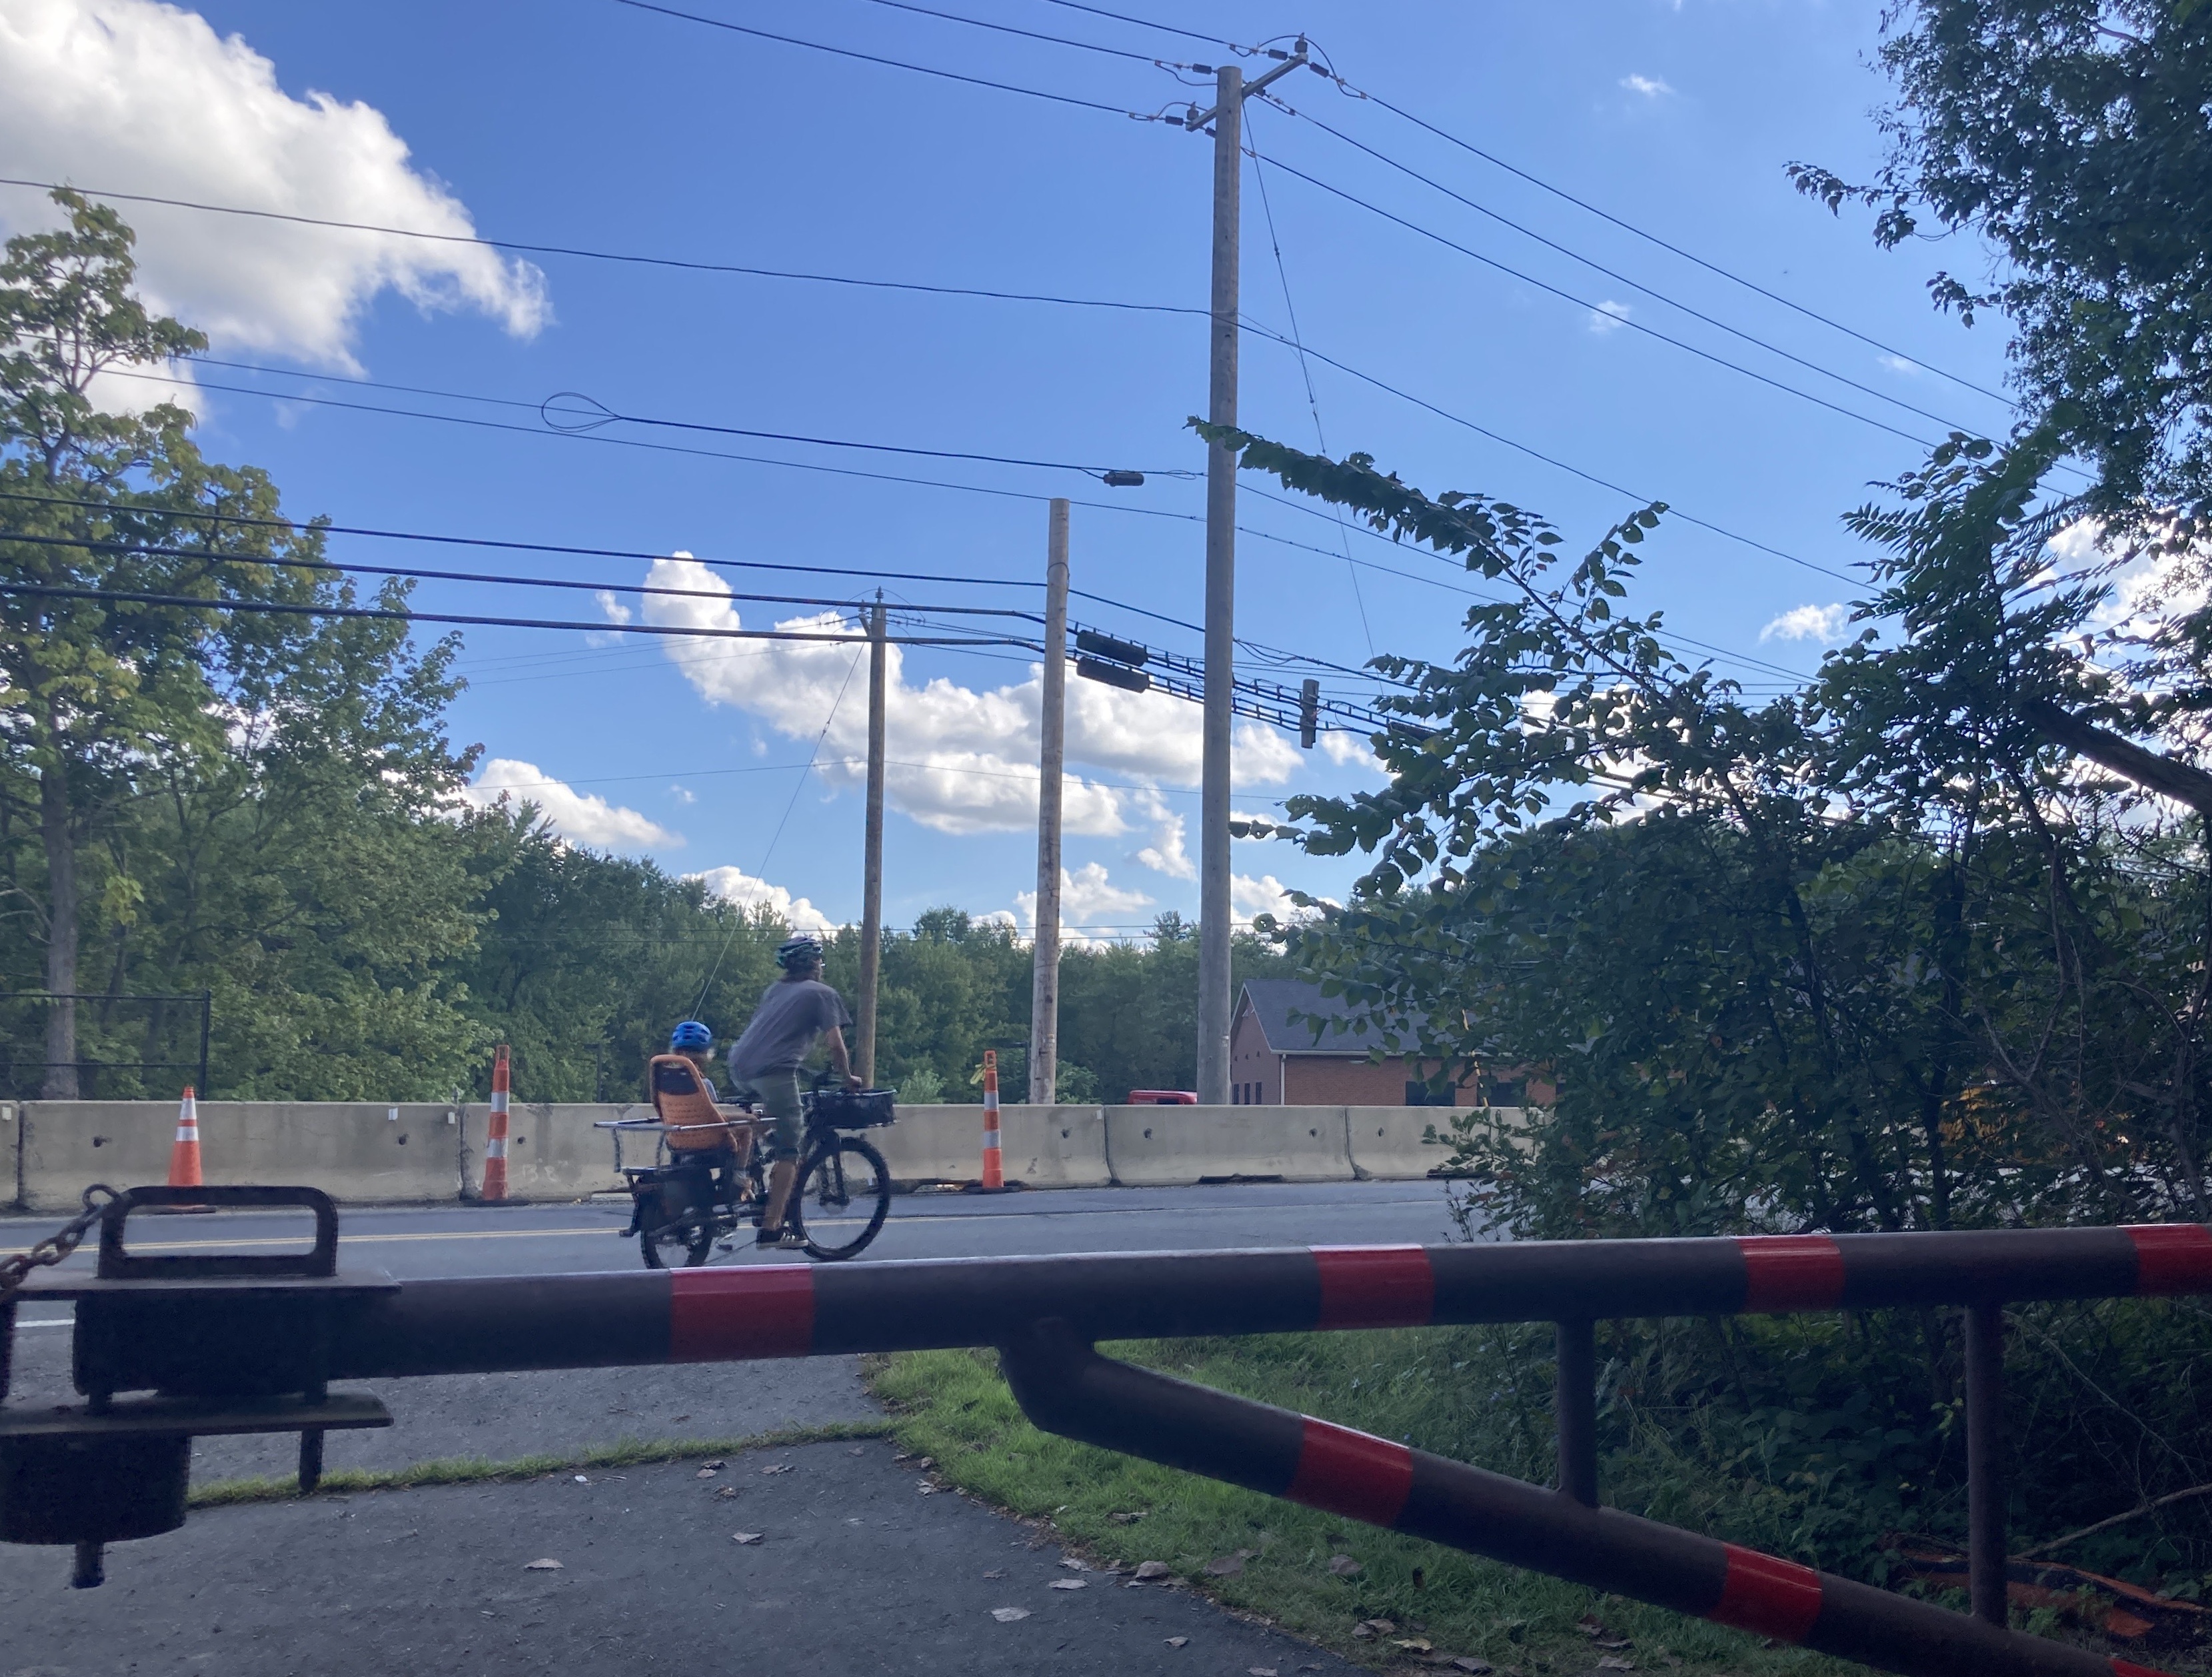 A man and child riding. a bike onto a 2-lane roadway. A row of jersey barriers blocks the opposite side of the street. Beyond are some power lines and trees, and in the foreground is a gate.